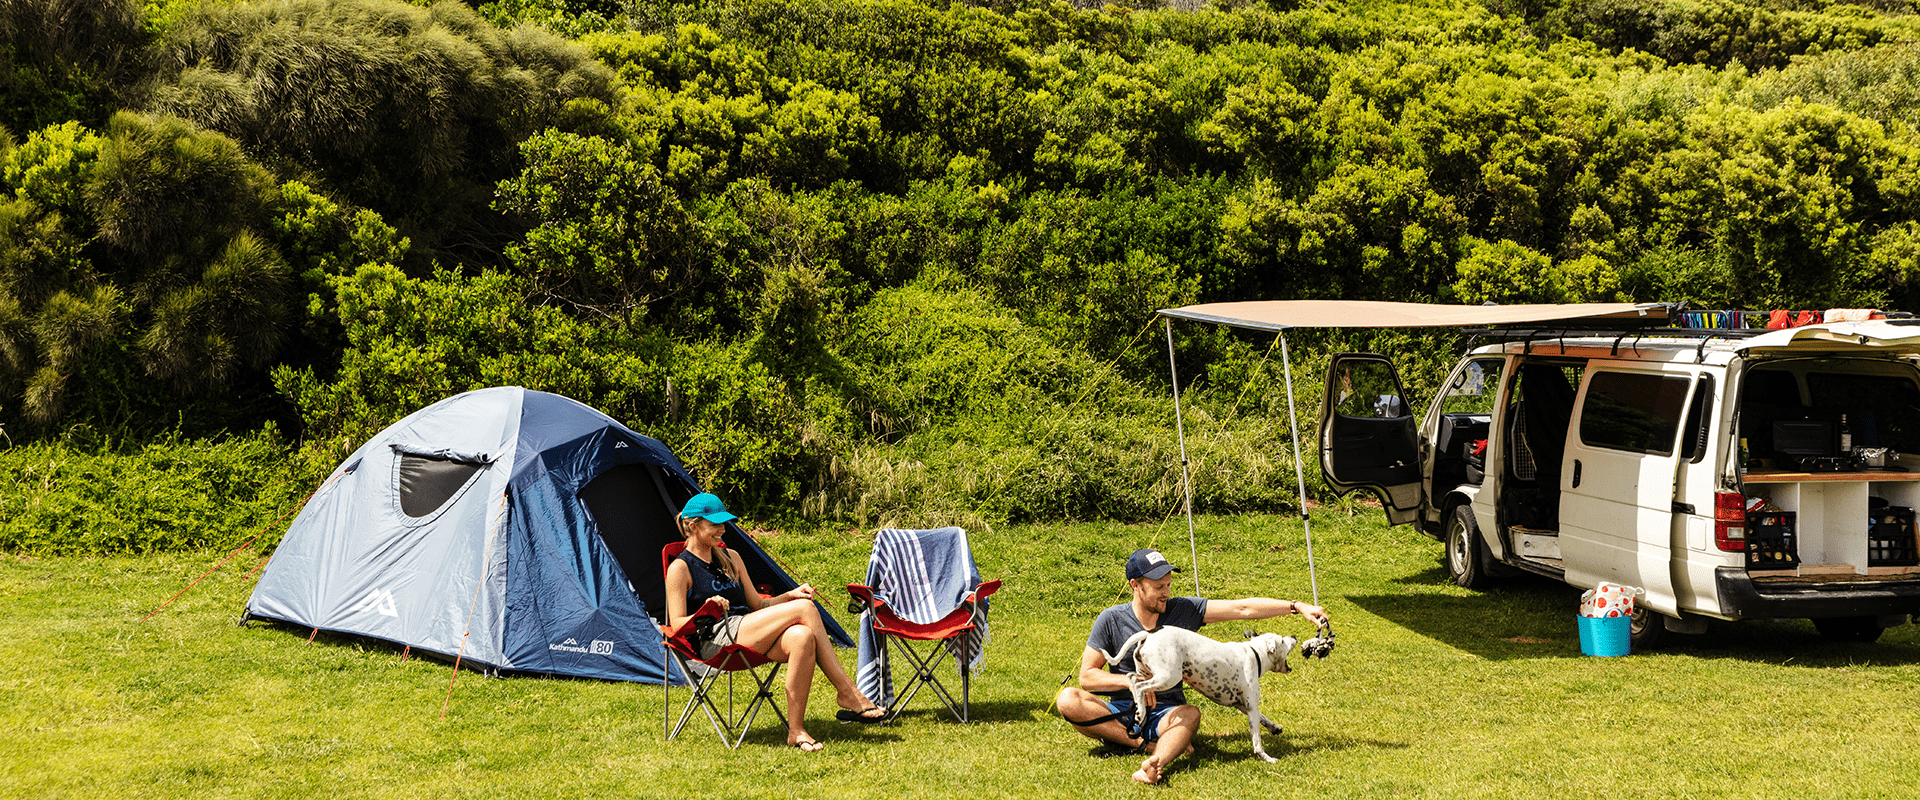 A couple sits around their tent playing with their dog, a white van is parked next to their tent, coastal vegetation surrounds them.